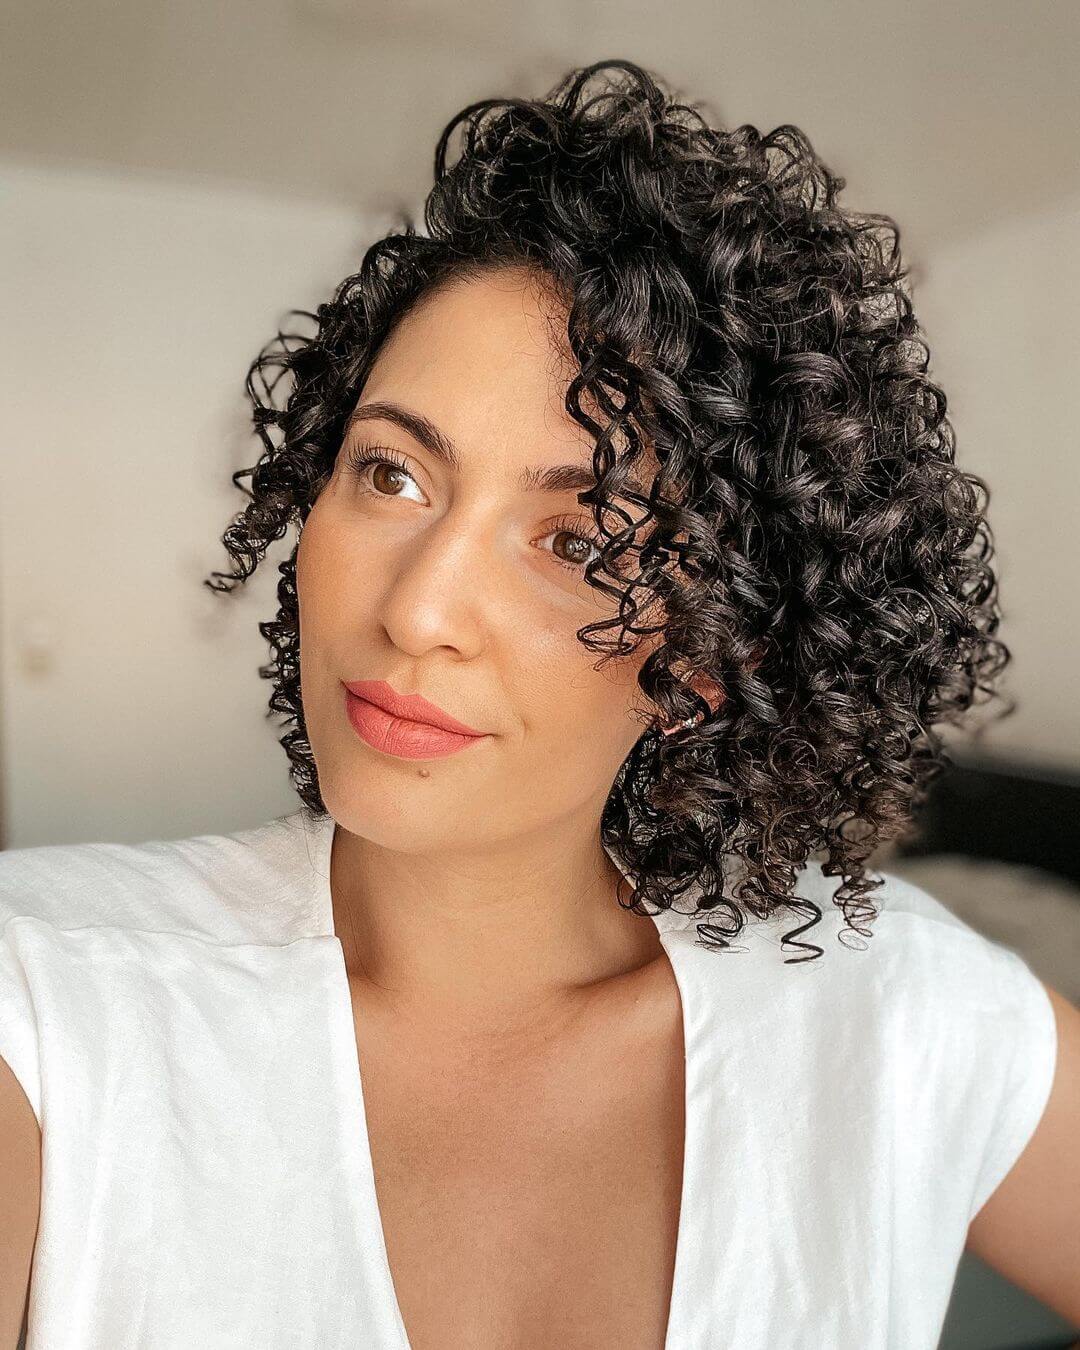 Short Curly Hairstyle for Women - K4 Fashion